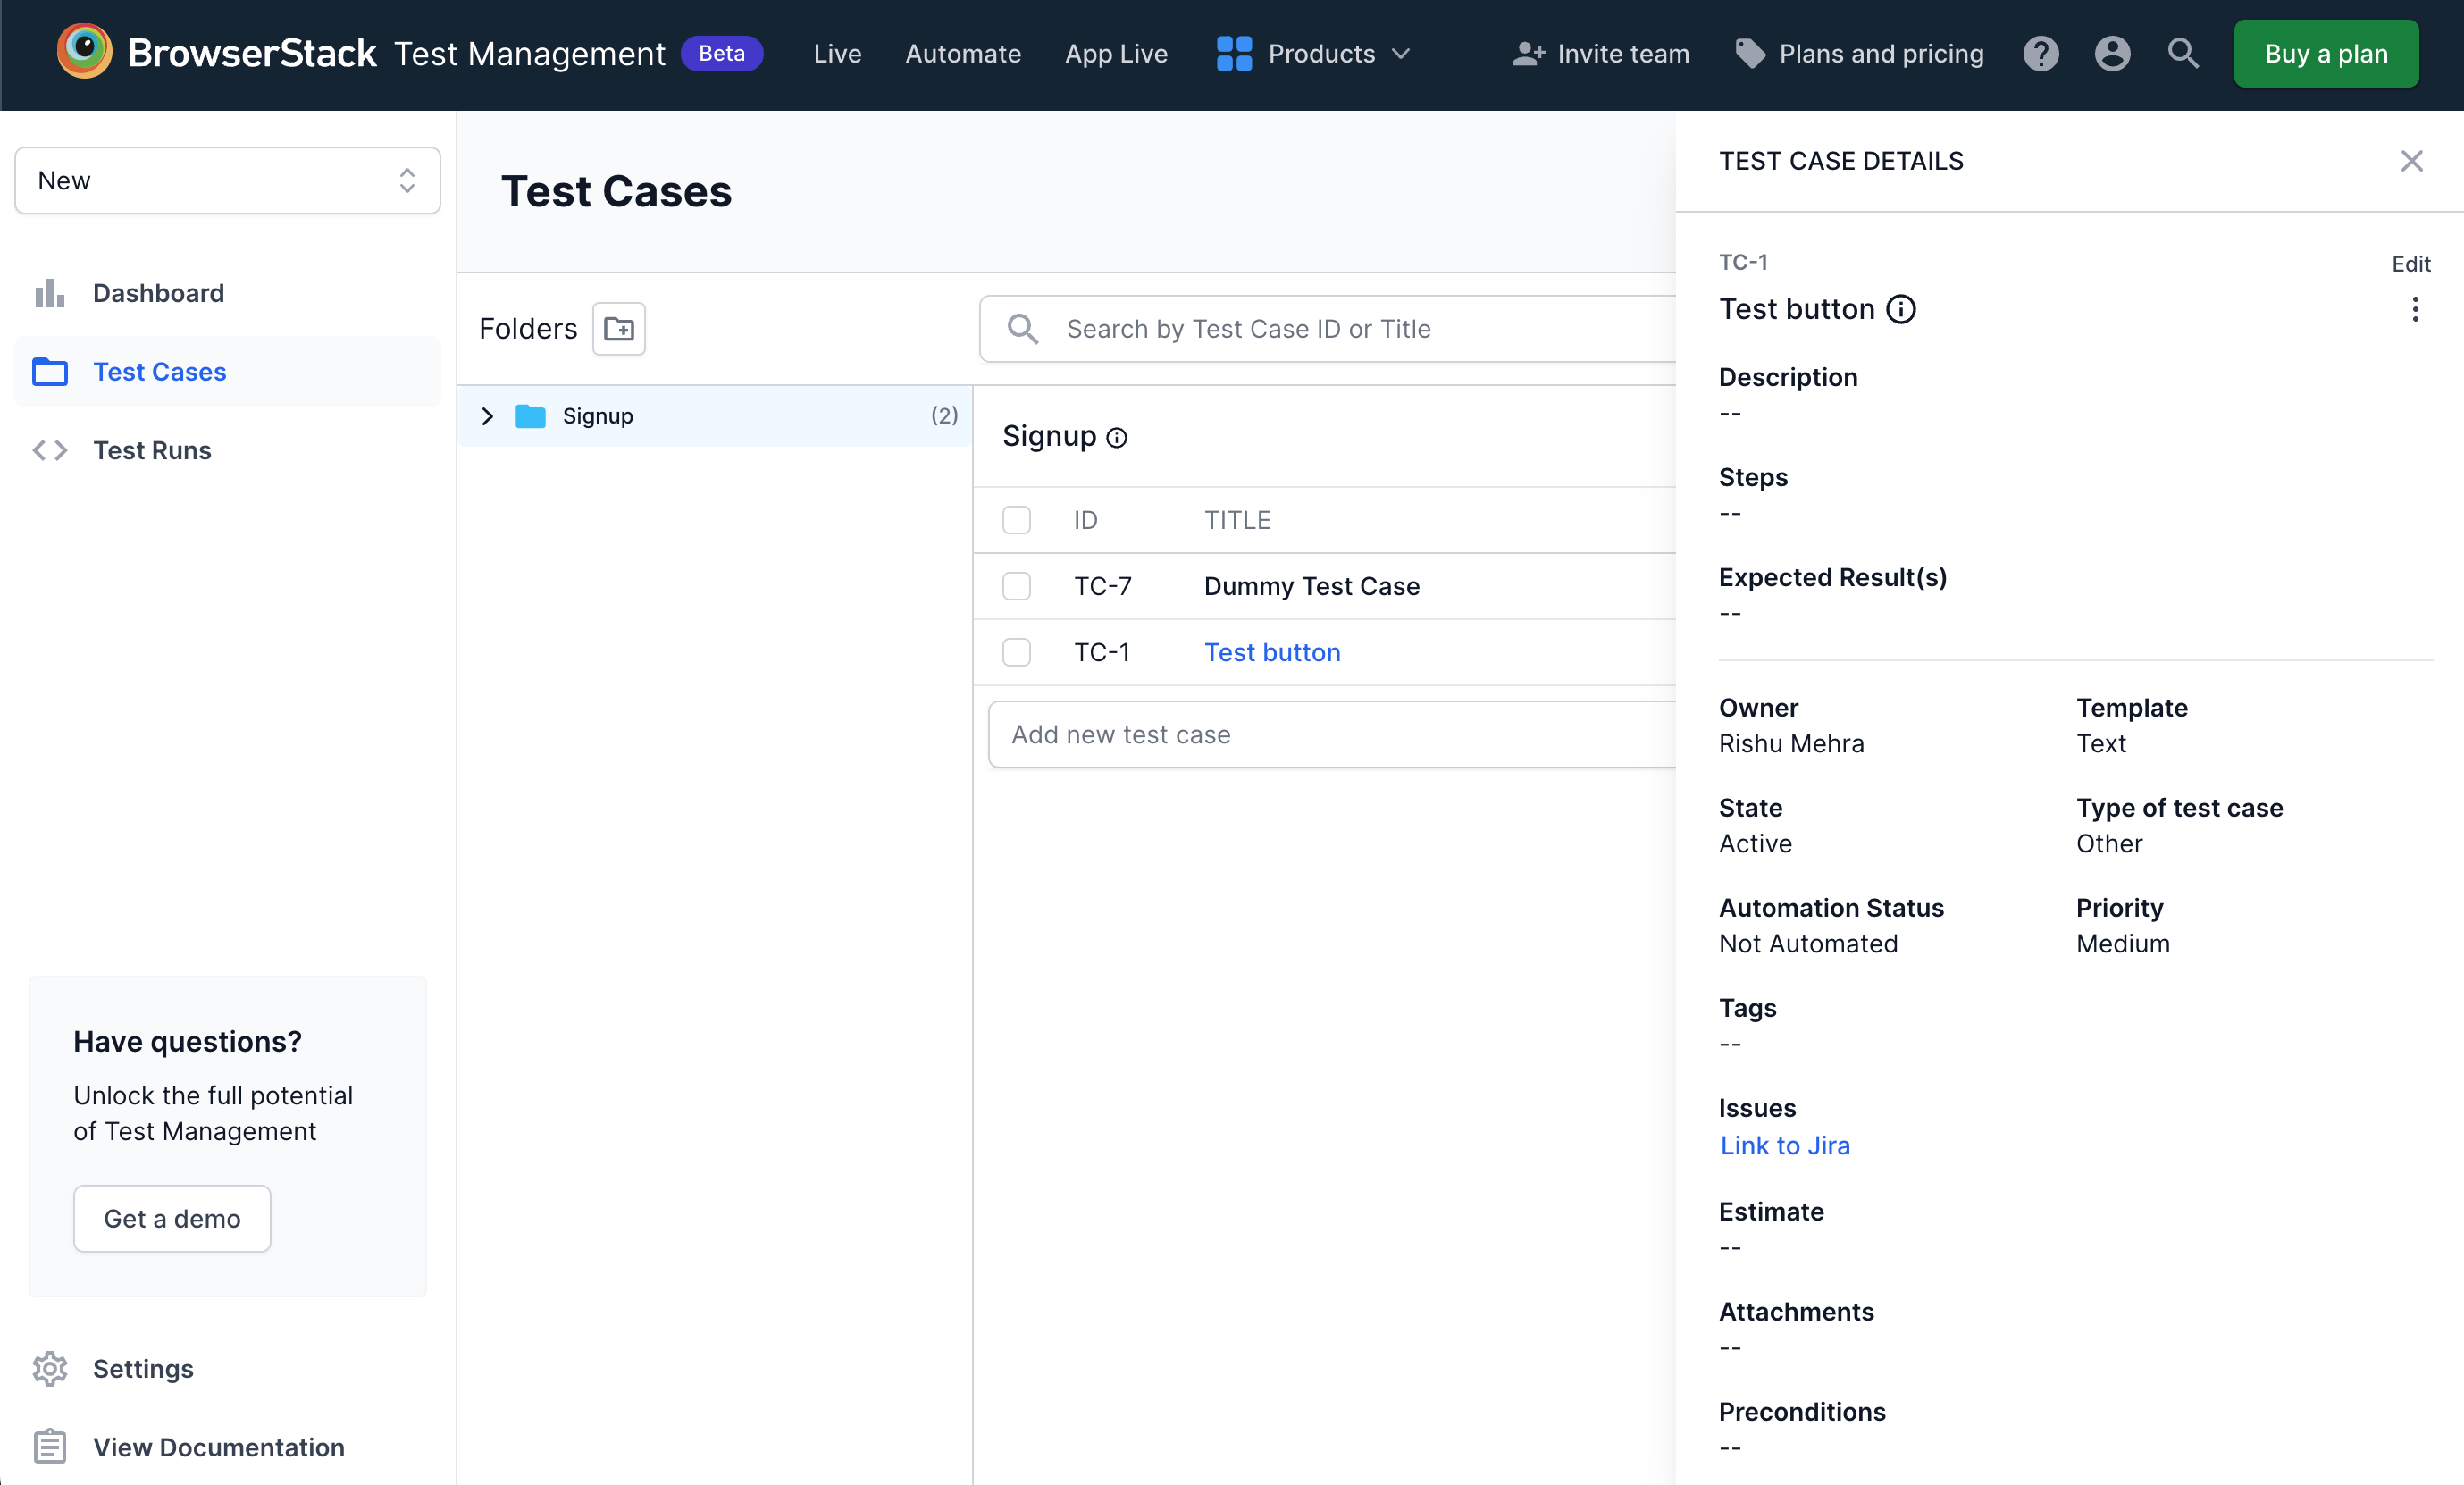 Link Jira Issue from test case details